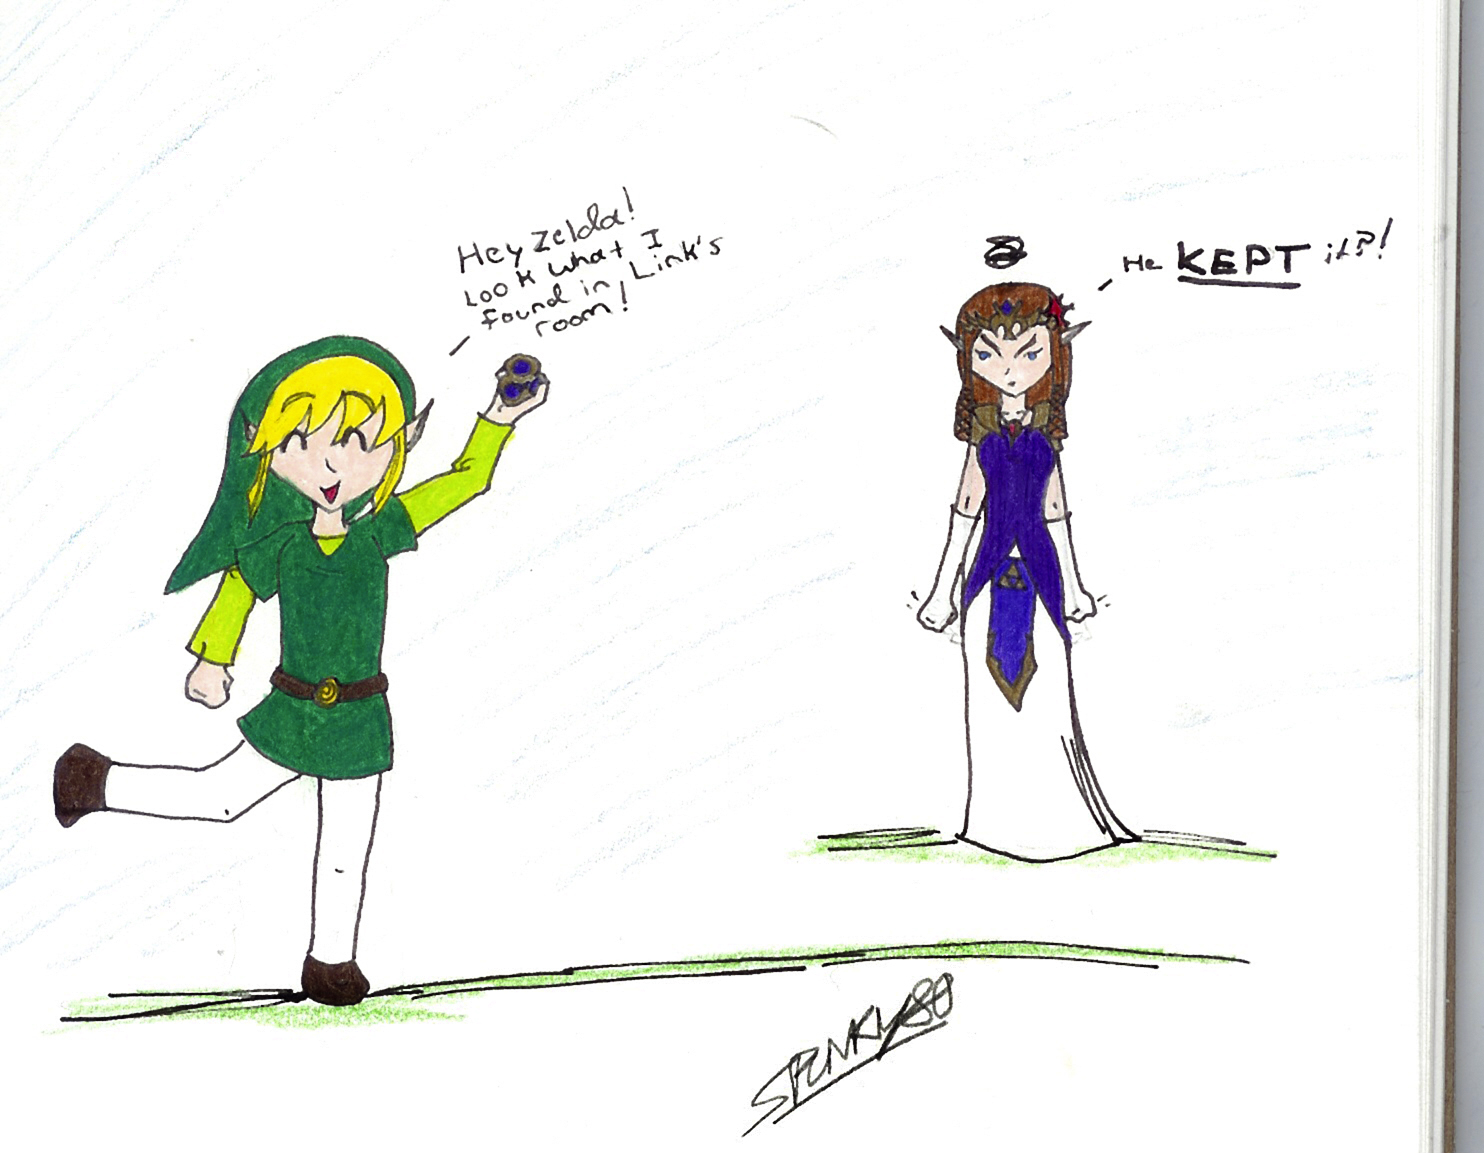 HE KEPT IT?!- art request for queenofred by spunky80